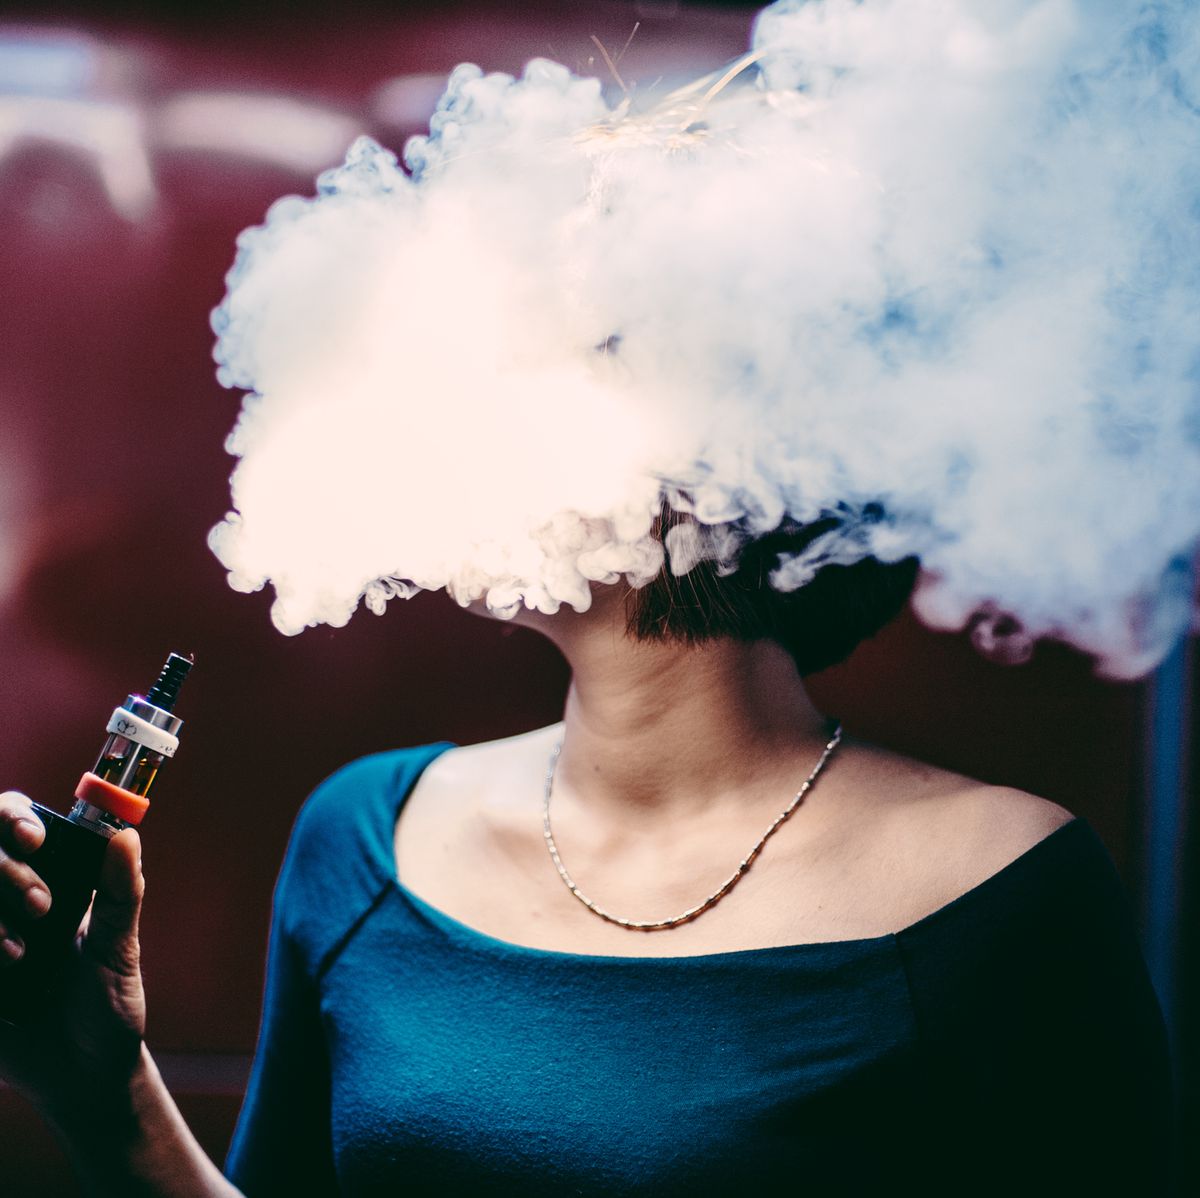 Is Vaping Bad For You? - Vaping vs Smoking Side Effects and Risks